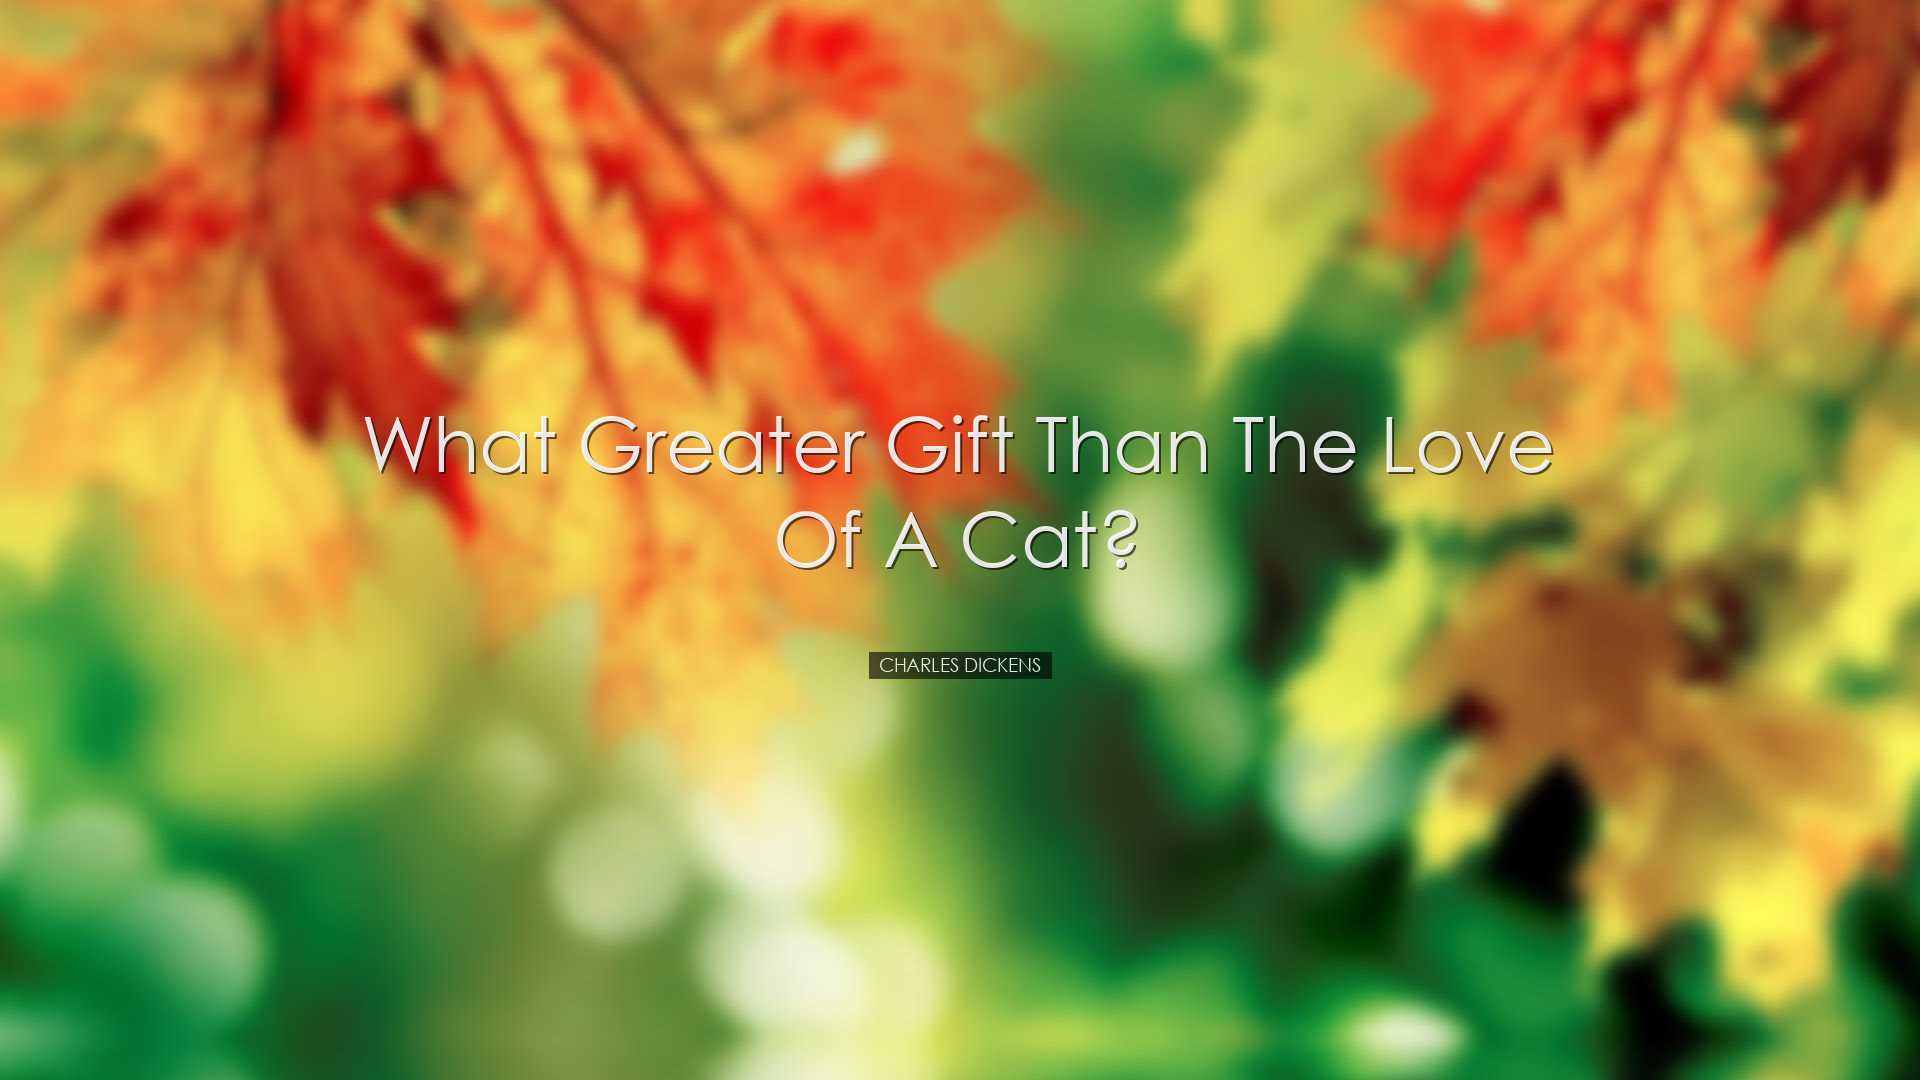 What greater gift than the love of a cat? - Charles Dickens